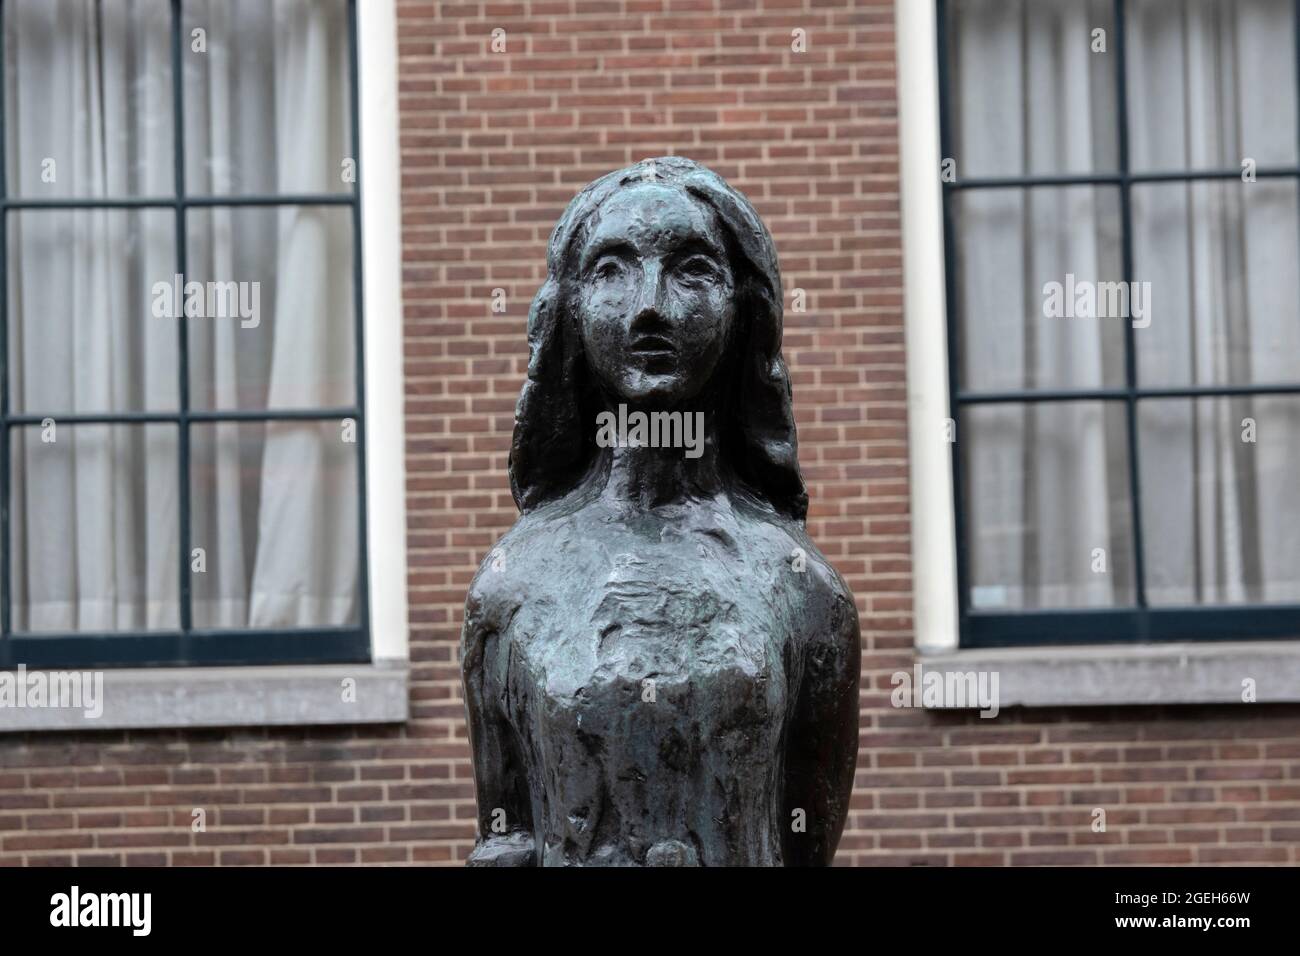 Statue Anne Frank At Amsterdam The Netherlands 16-8-2021 Stock Photo